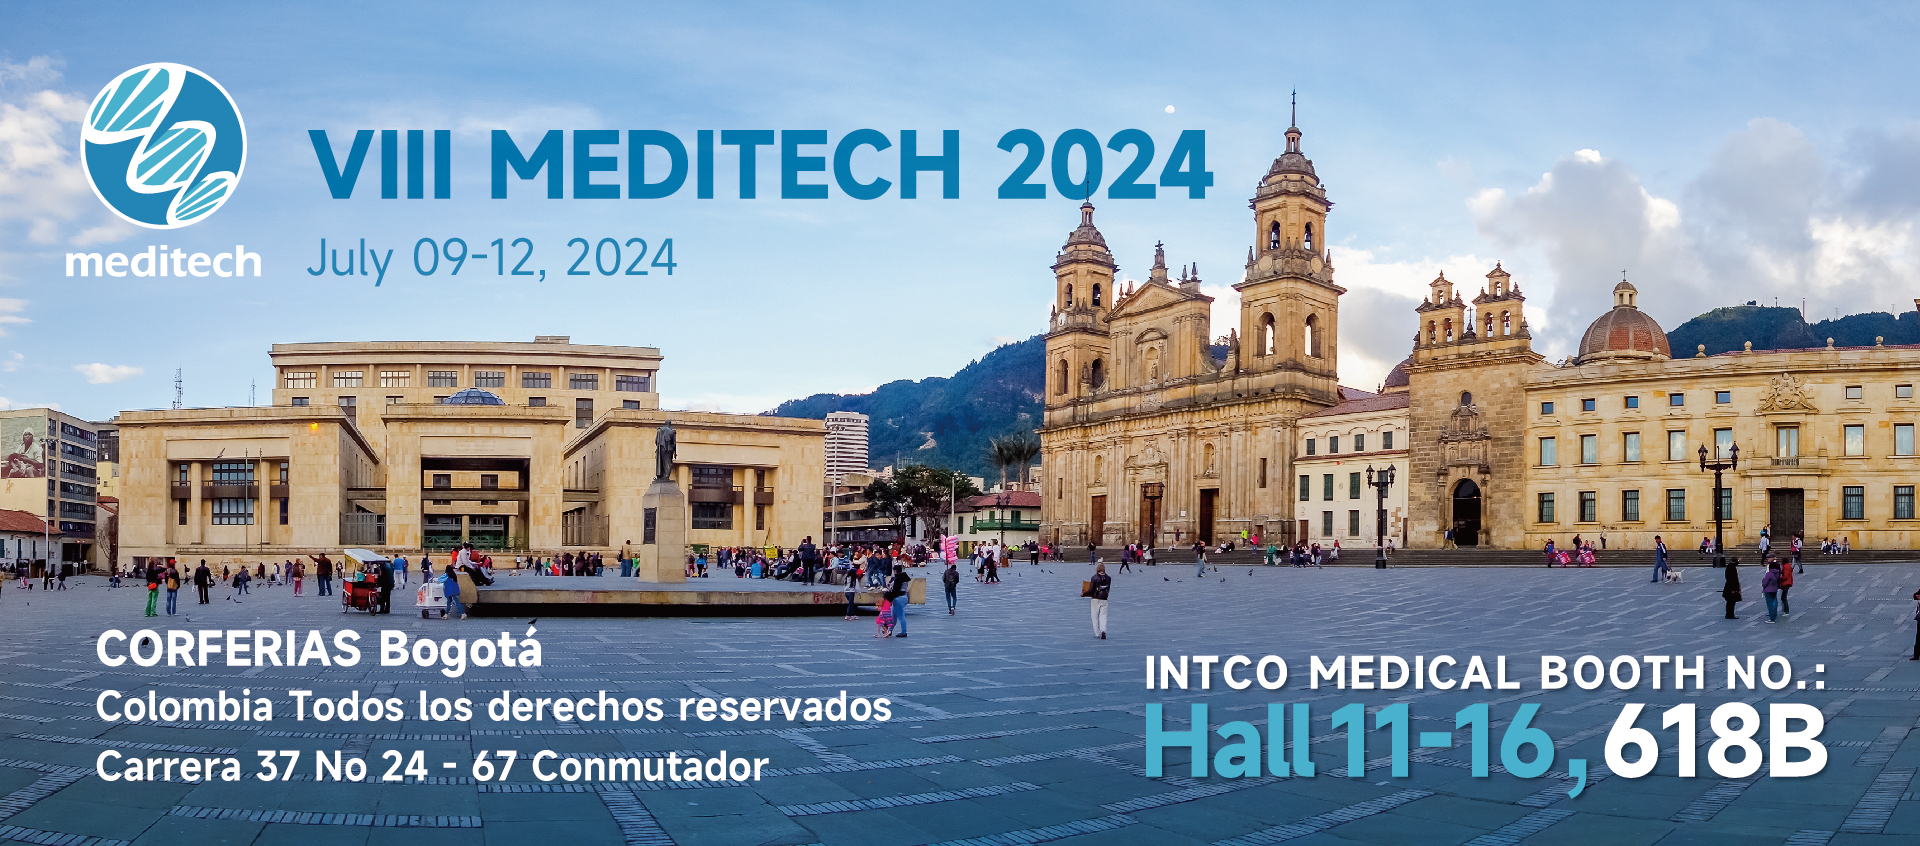 MEDITECH, the International Medical Equipment, Laboratory and Healthcare Exhibition in Bogota, Colombia,